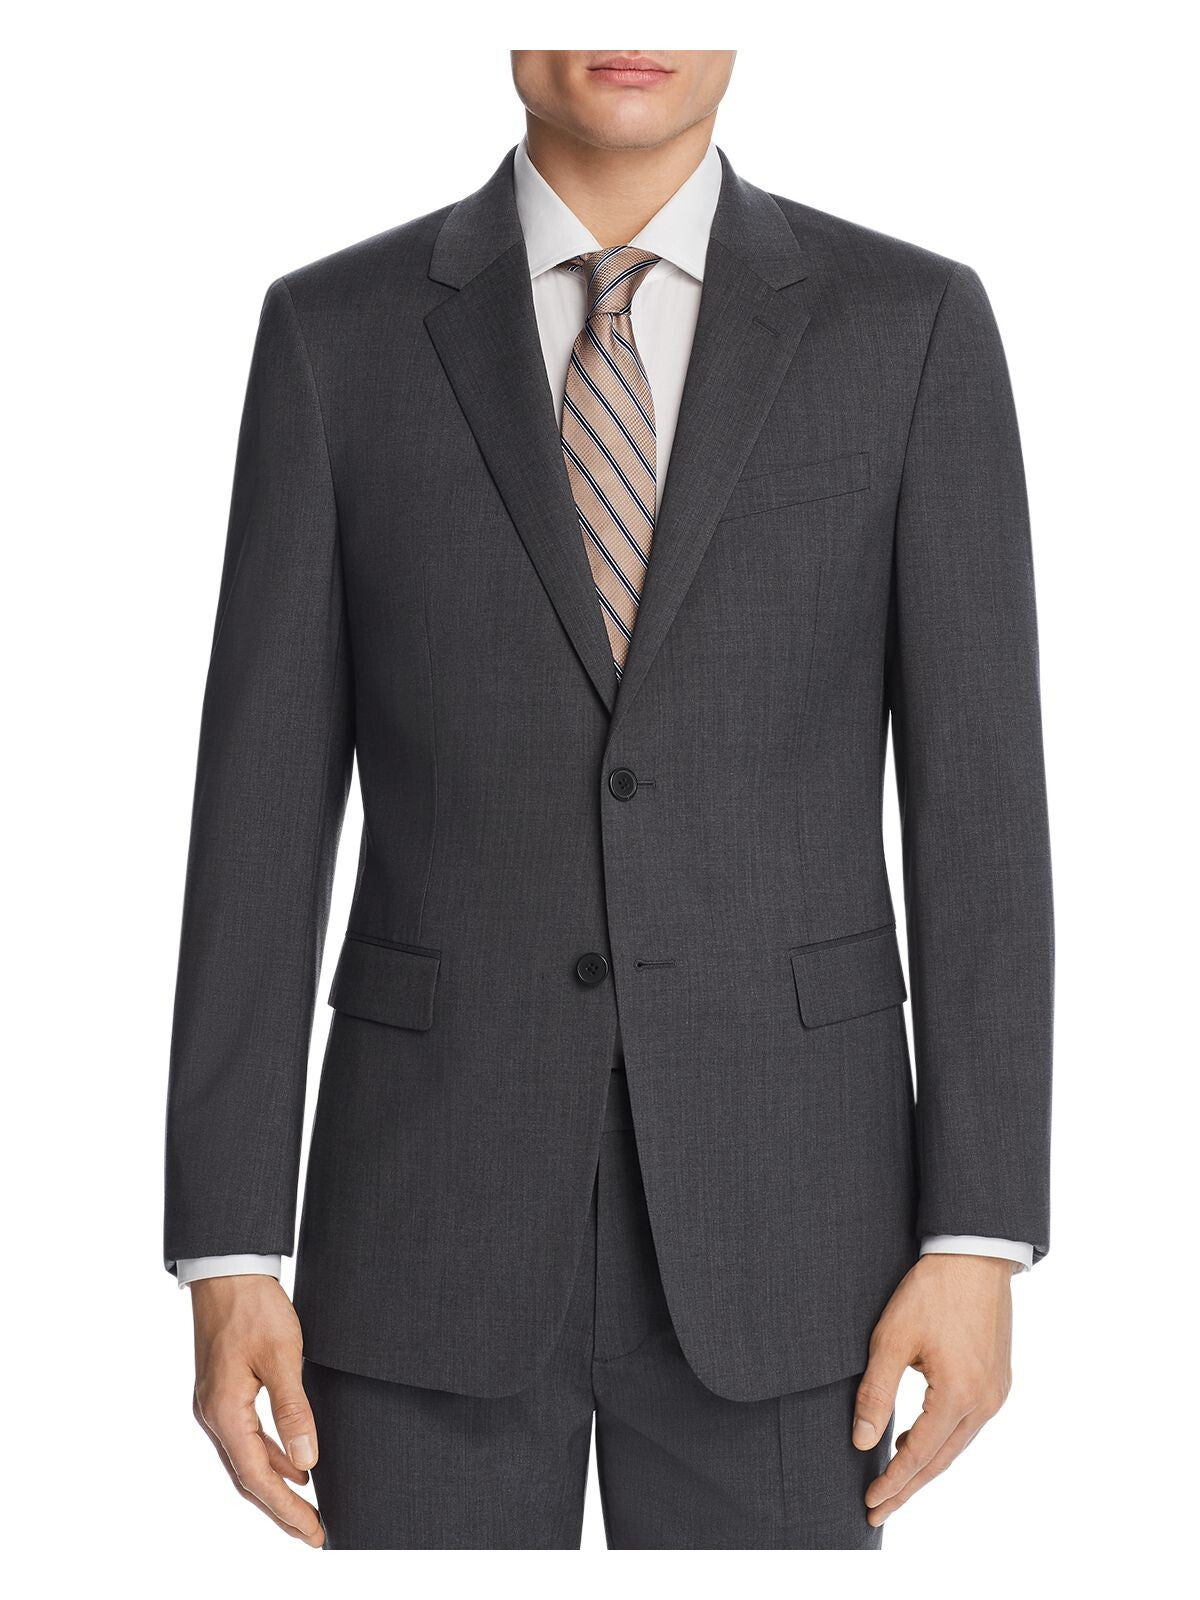 THEORY Mens Chambers Gray Single Breasted, Stretch, Slim Fit Stretch Suit Separate Blazer Jacket 46R